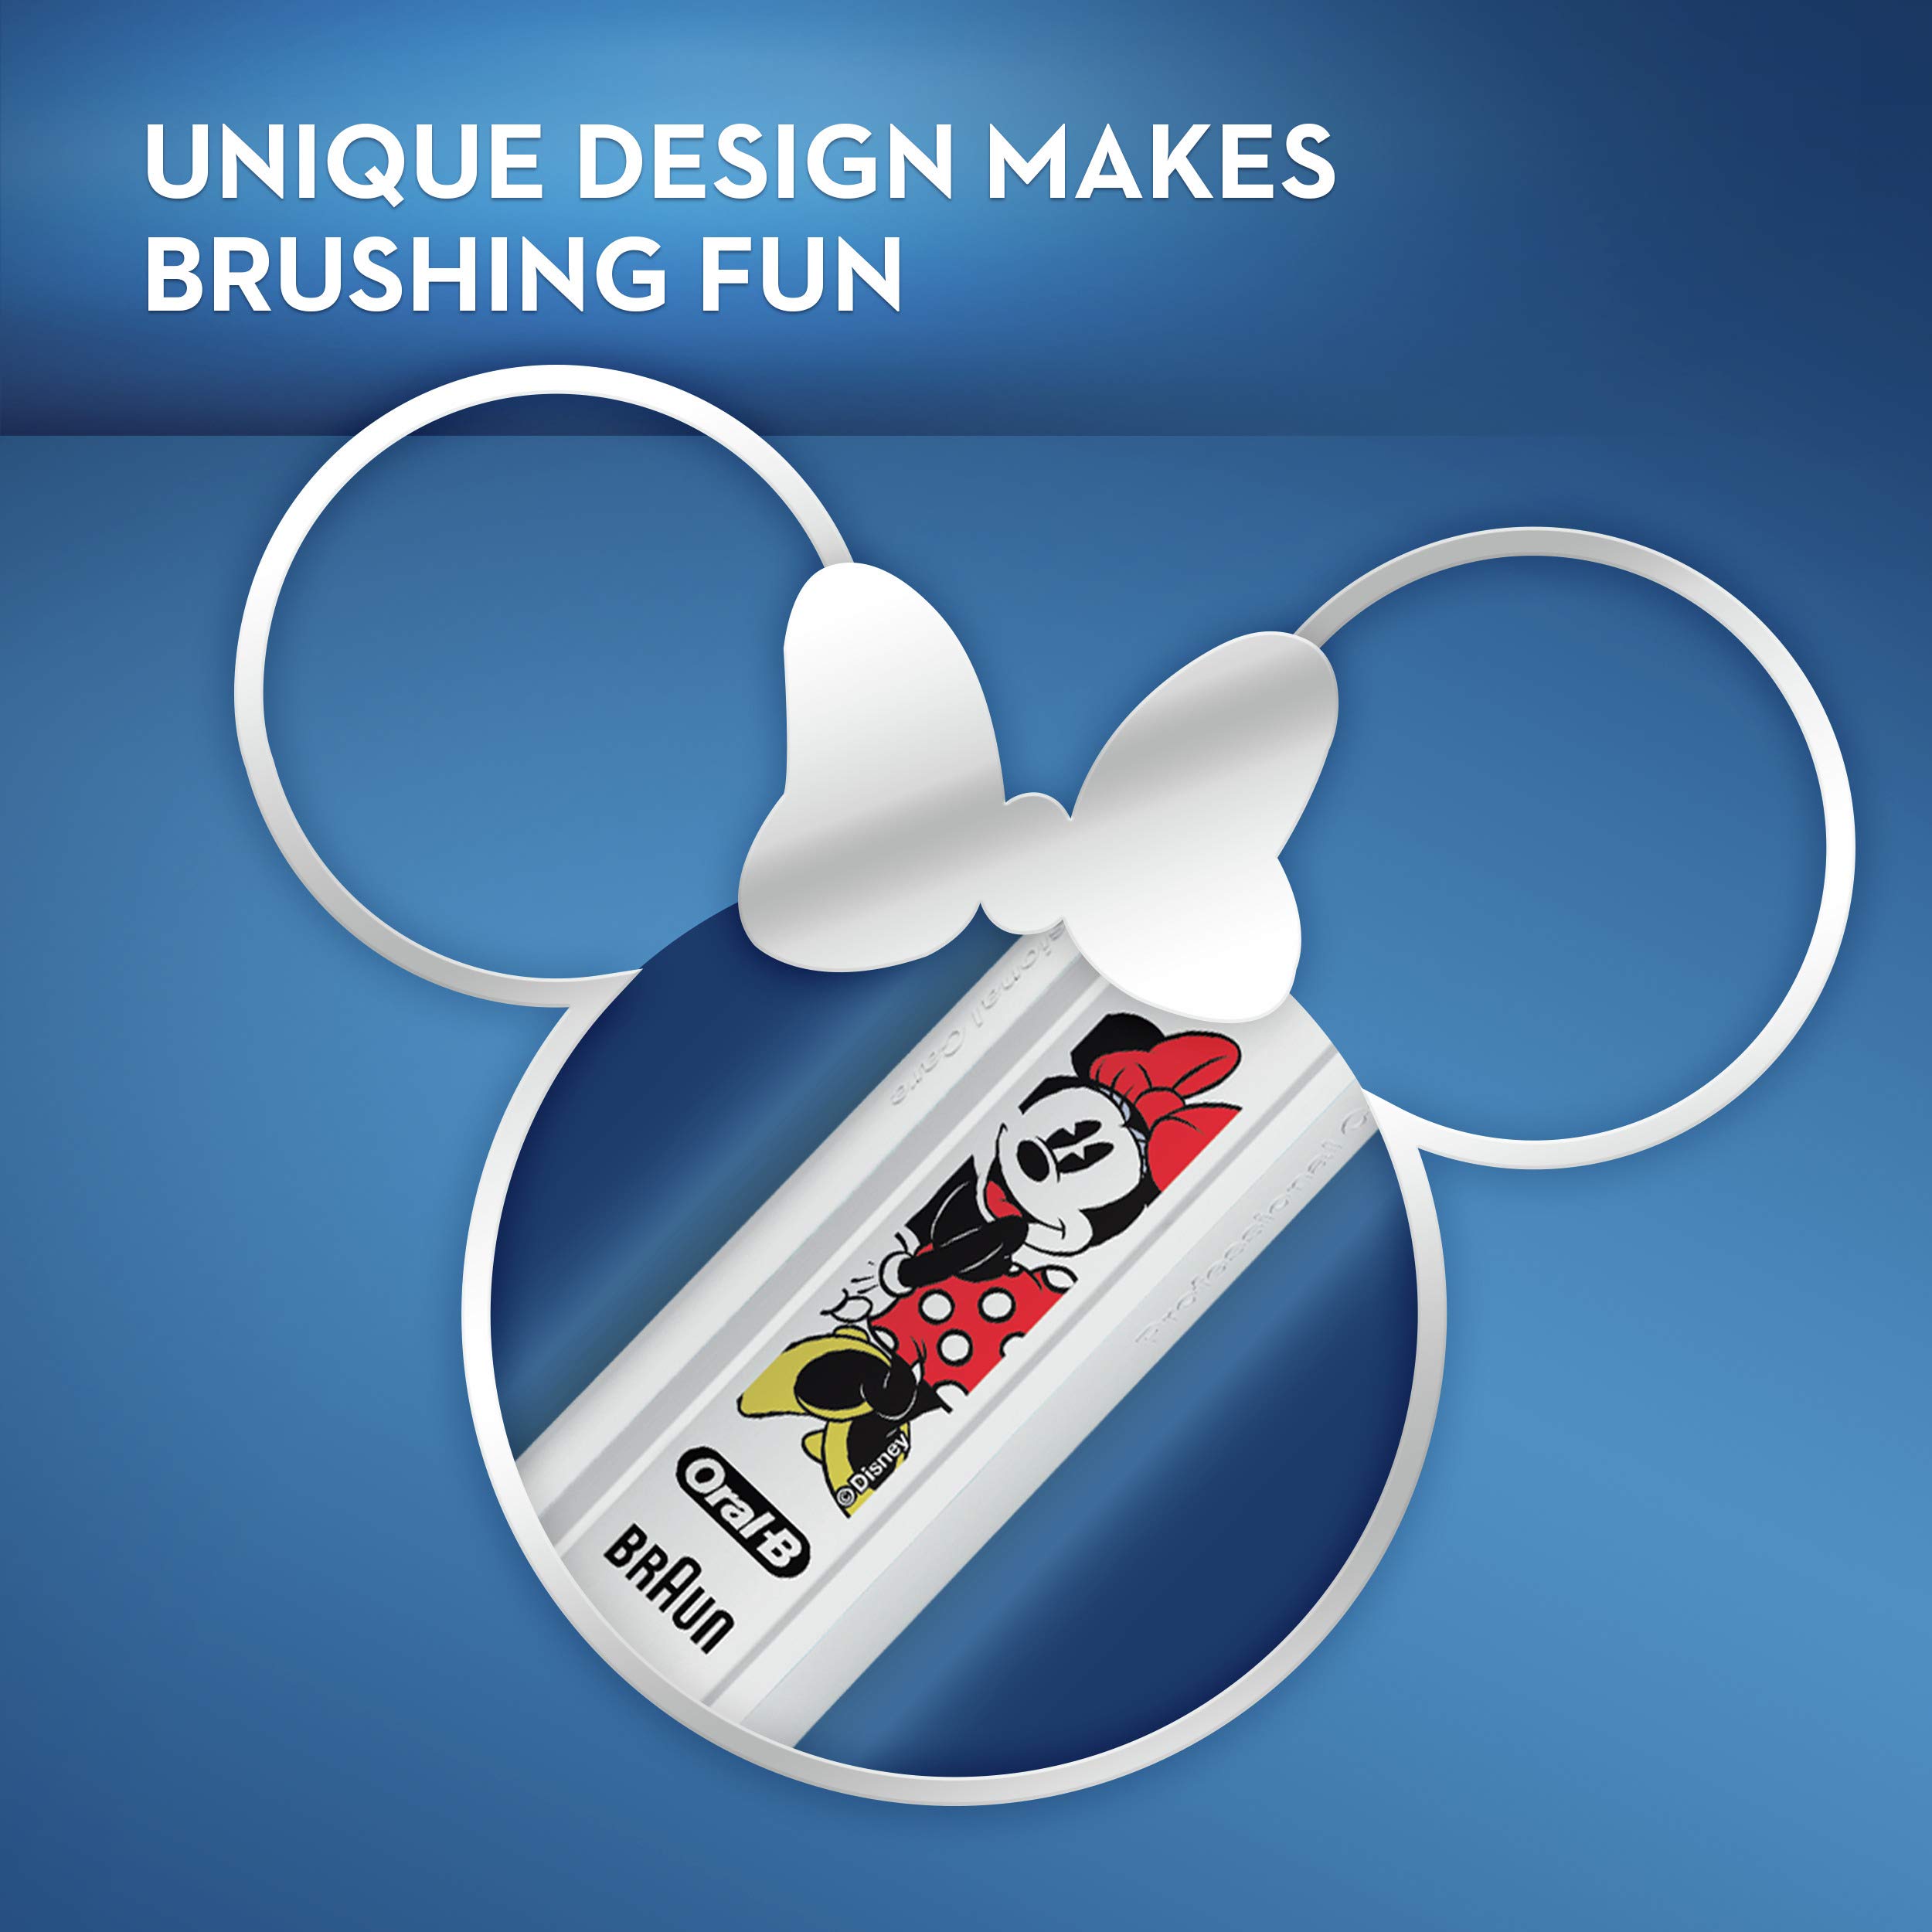 Oral-B Kids Electric Toothbrush Featuring Disney's Minnie Mouse, Rechargeable Toothbrush with (2) Brush Heads, for Kids 6+